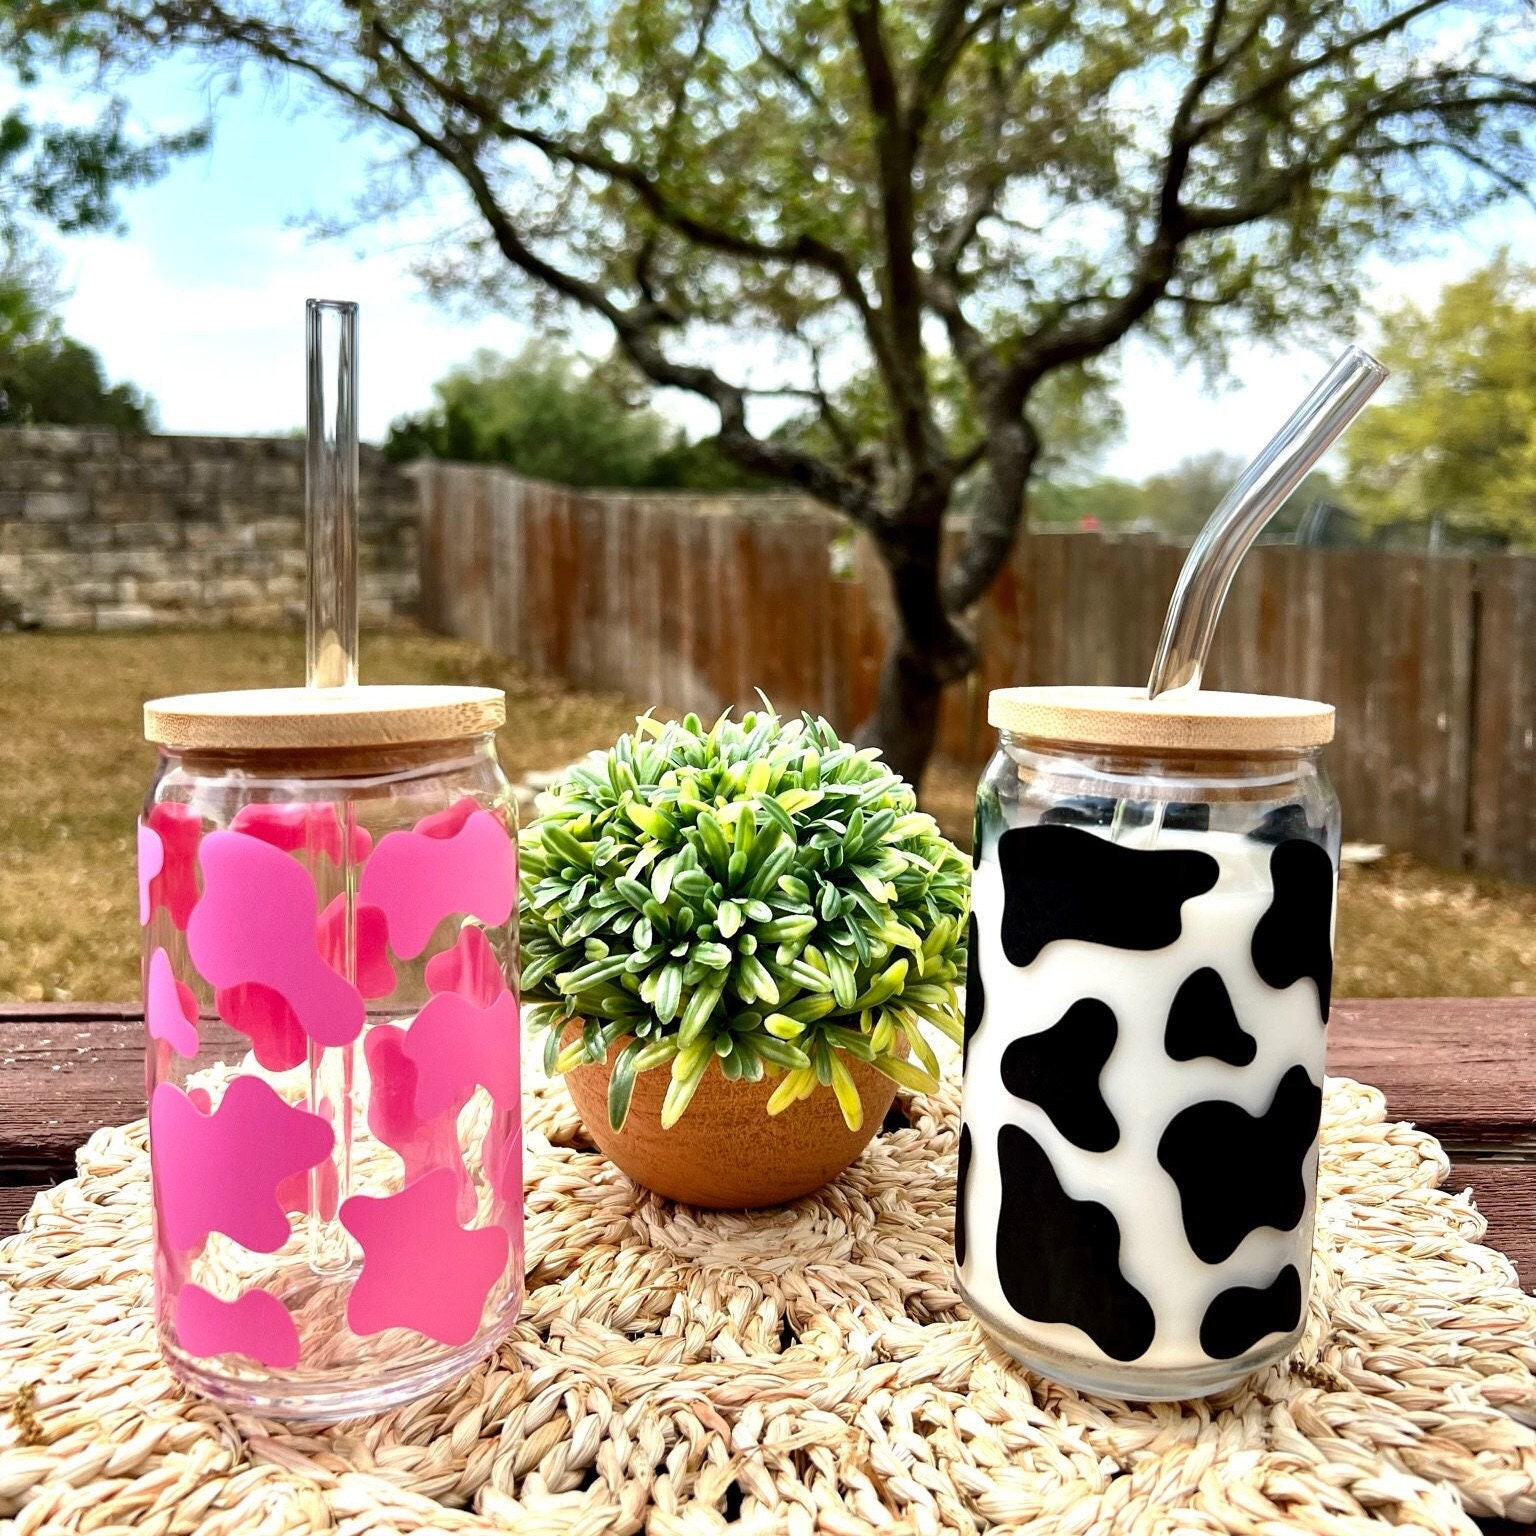 Leopard Glass Can, Cheetah Glass Can, Beer Can Glass, Iced Coffee Glass, Bamboo  Lid, Boho Glass Can, Aesthetic Glass Can, Eco-friendly Glass 